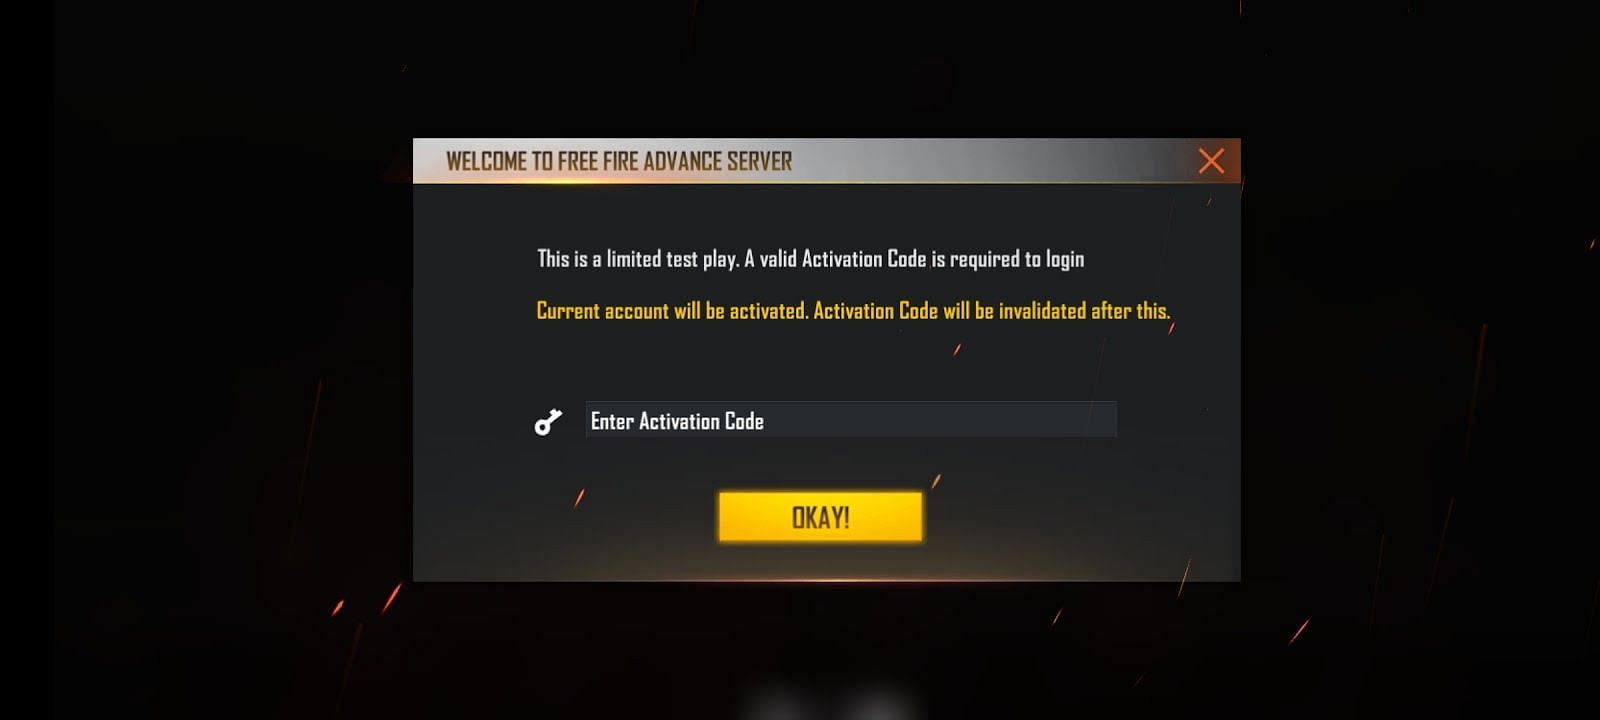 Activation code is a must for accessing the Free Fire Advance Server (Image via Garena)